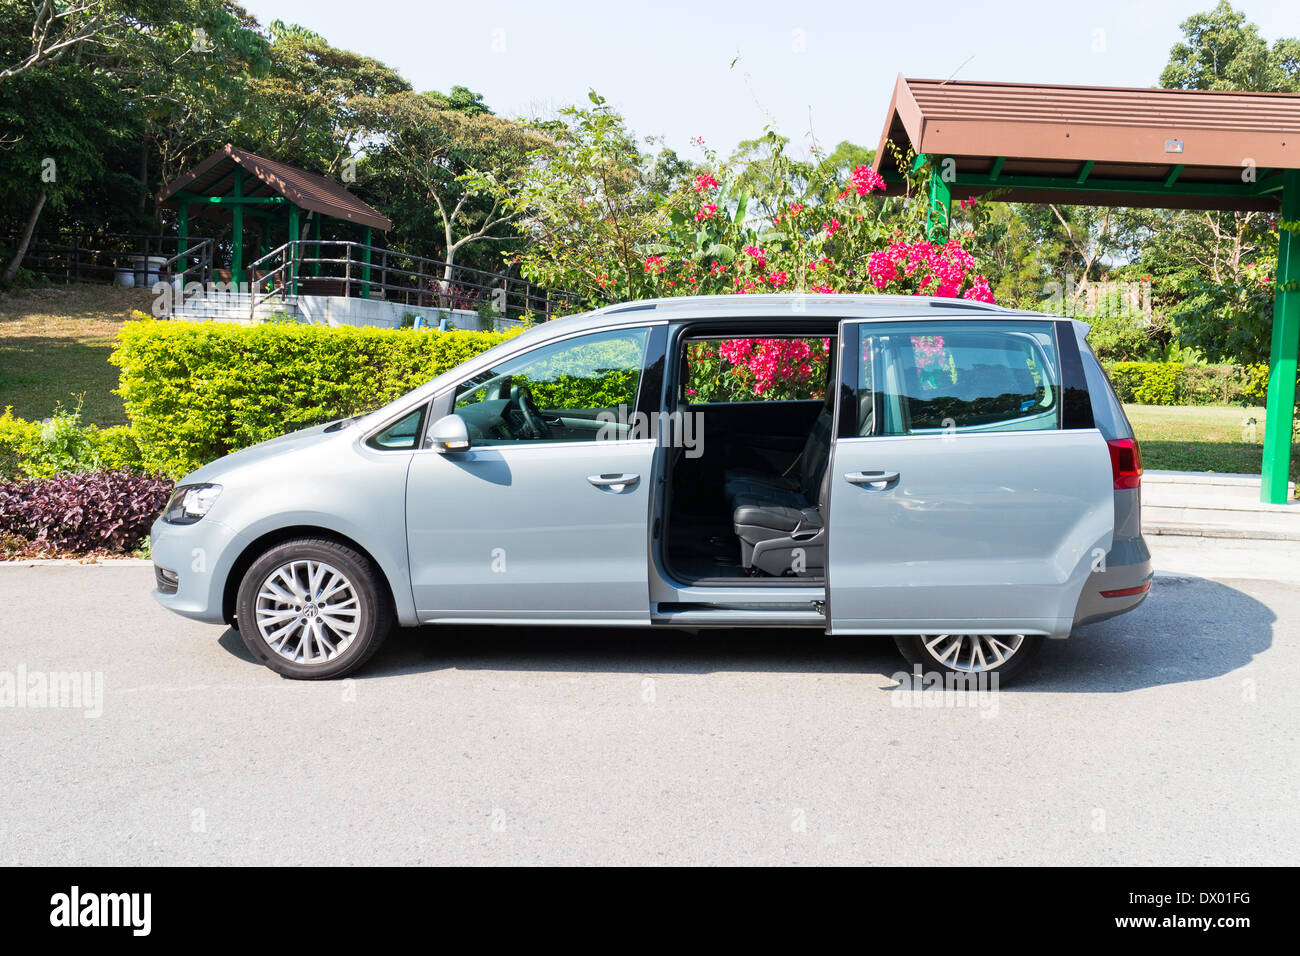 Volkswagen Sharan 2013 MPV, the entry level family car for 7 seat